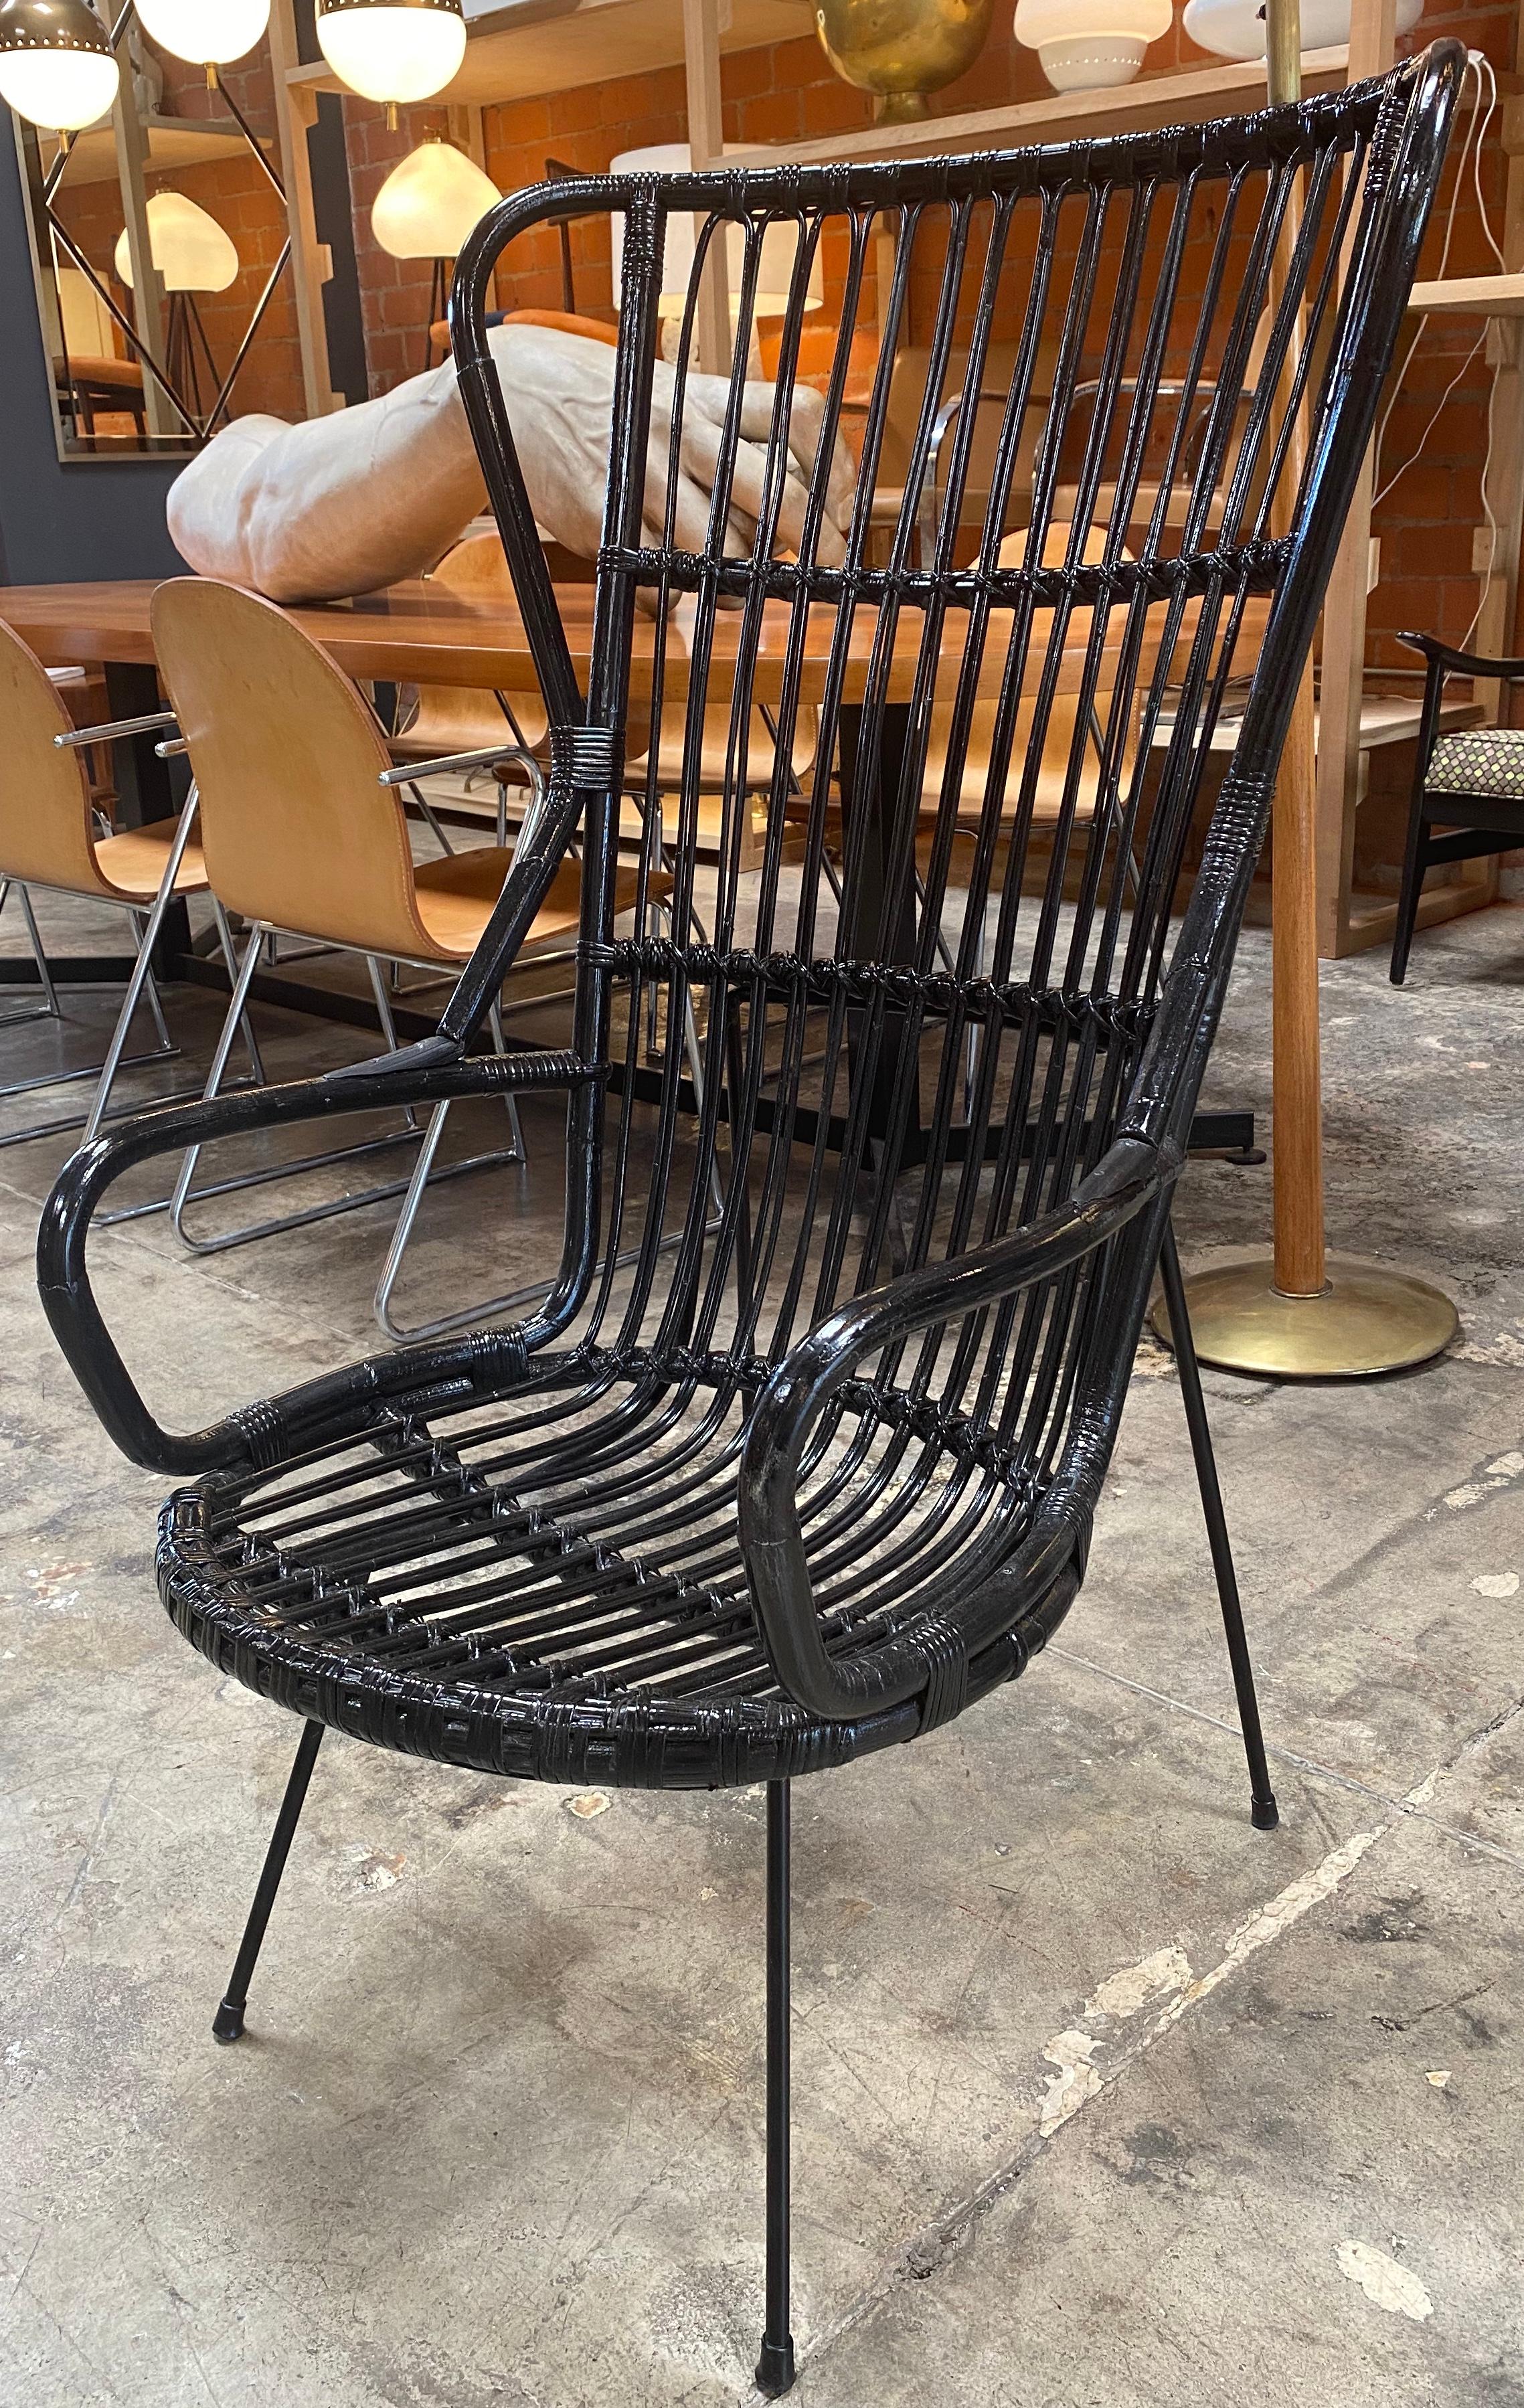 Midcentury Italian handcrafted high-back rattan armchair repainted black.
The armchair has no defects and is in excellent condition as you can see from the images, beautiful design and with an unmistakable Italian style of the 1950s.
Nothing